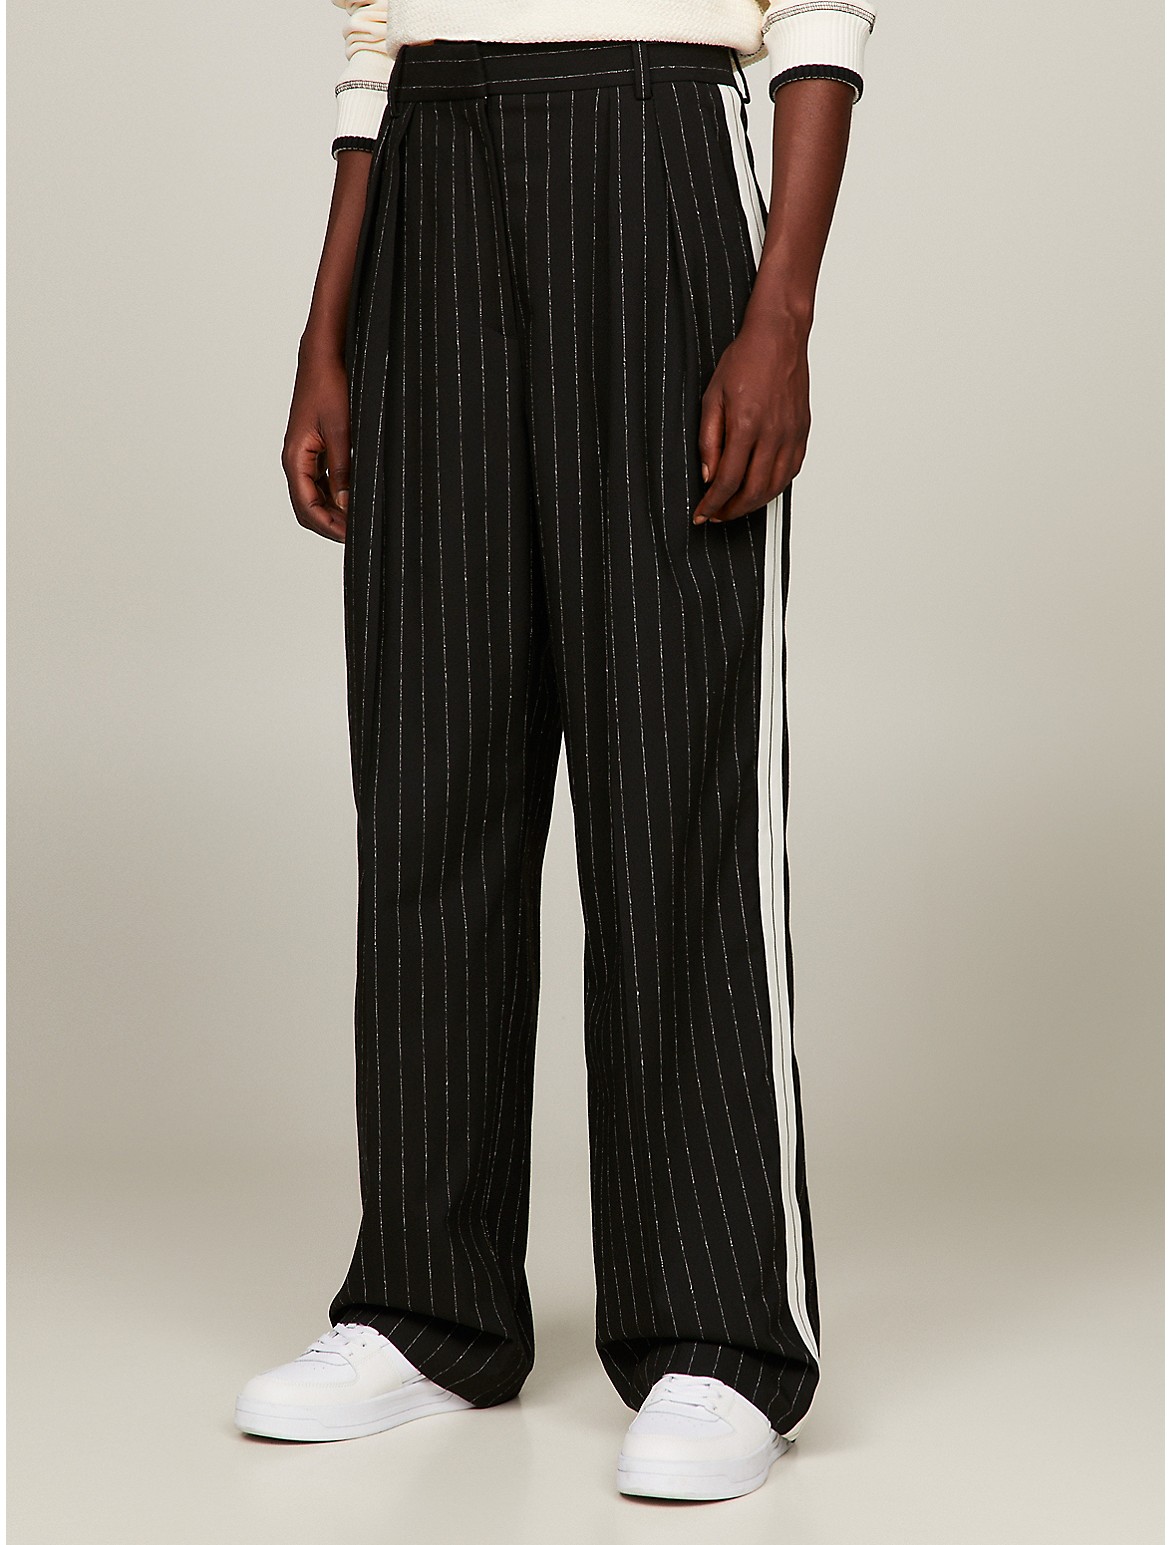 Tommy Hilfiger Women's Relaxed Fit Pinstripe Trouser